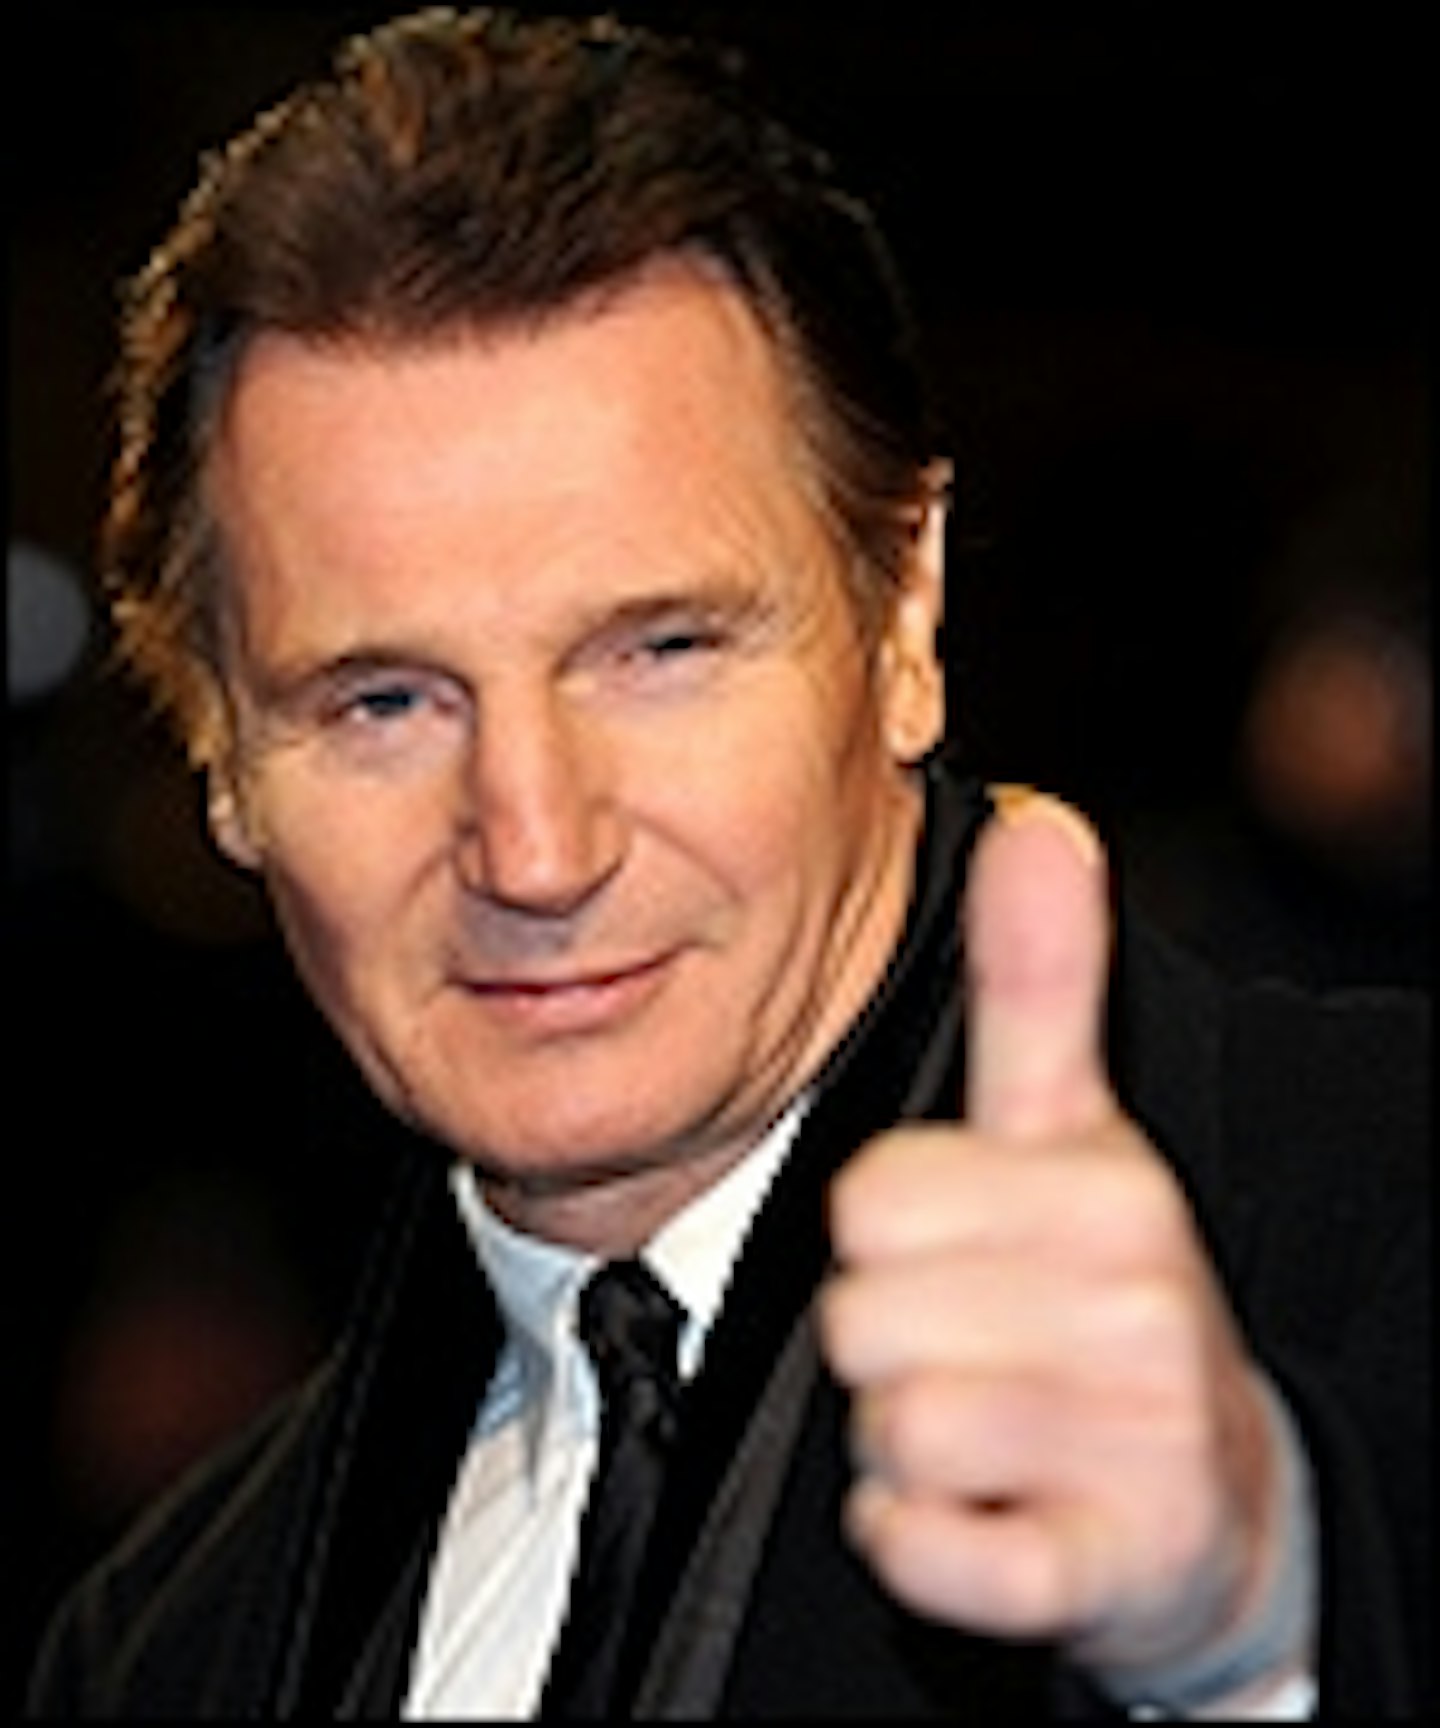 Liam Neeson Is The Creature For Juan Antonio Bayona's New Feature